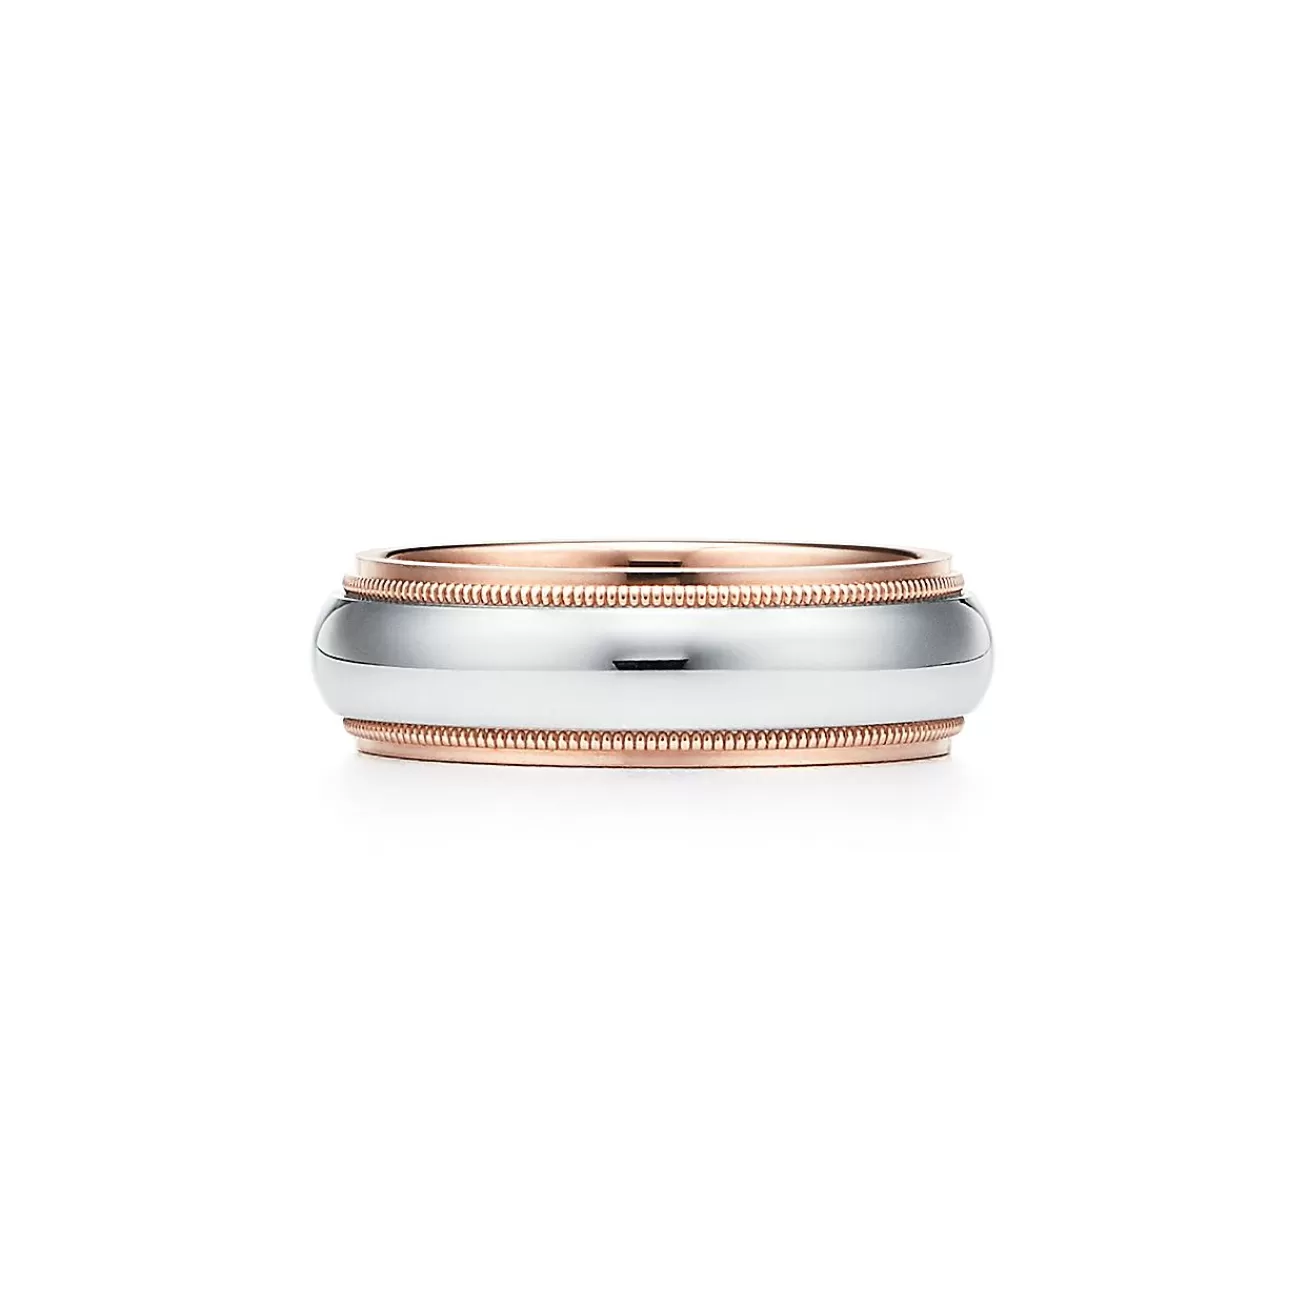 Tiffany & Co. Tiffany Together Milgrain Band Ring in Platinum and Rose Gold, 6 mm Wide | ^ Rings | Rose Gold Jewelry